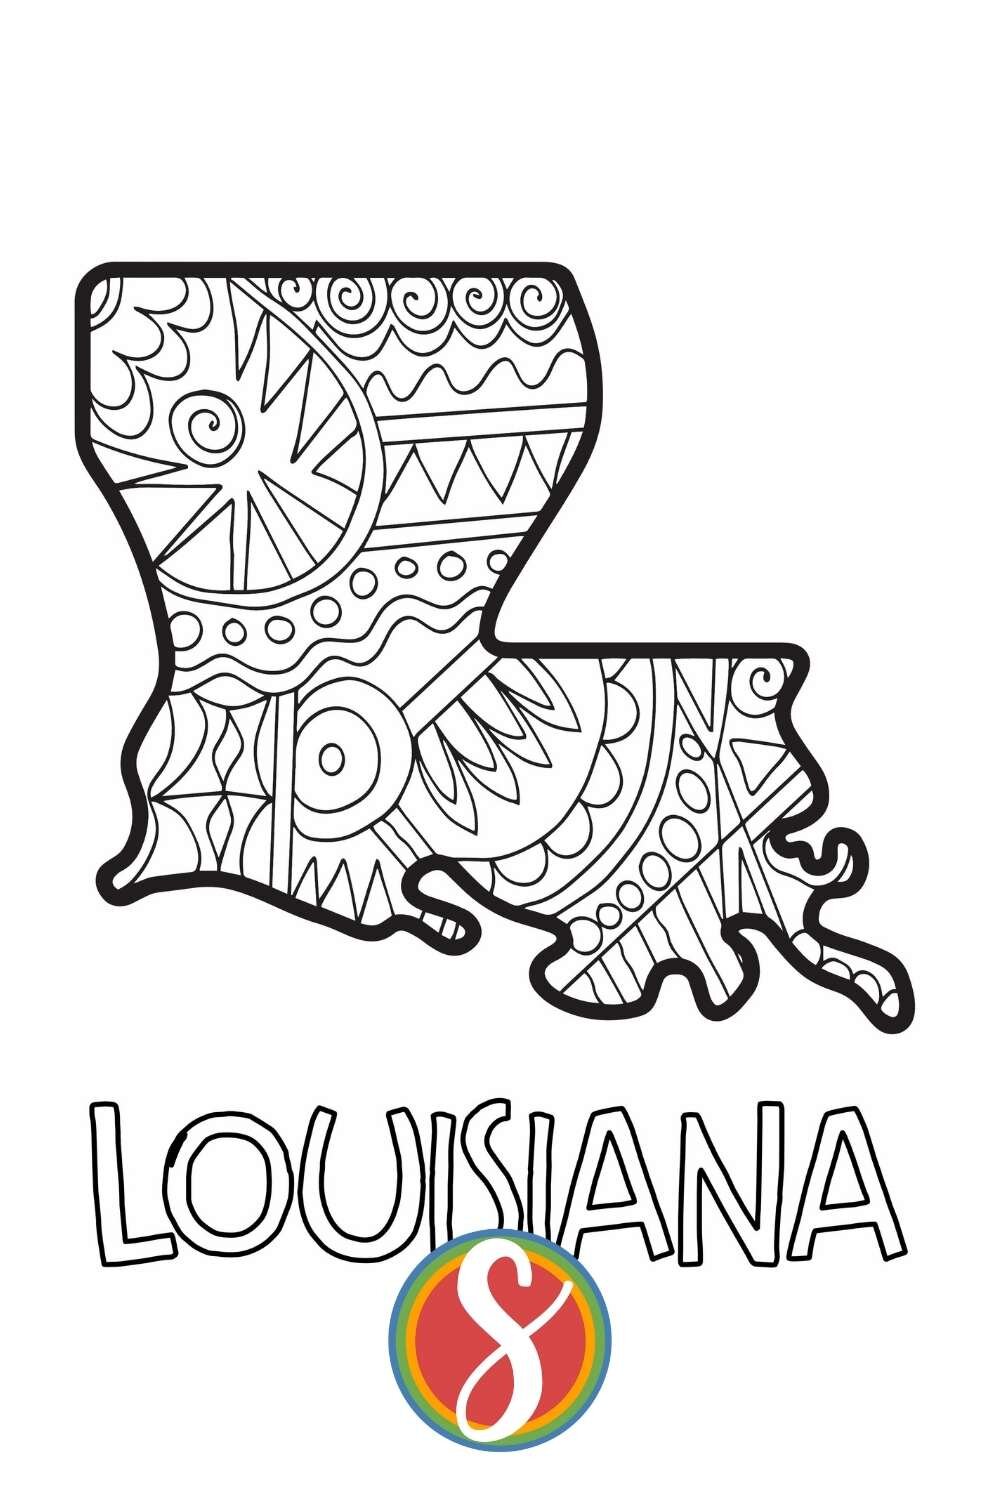 Louisiana Coloring Pages At Getcolorings Com Free Printable Colorings ...